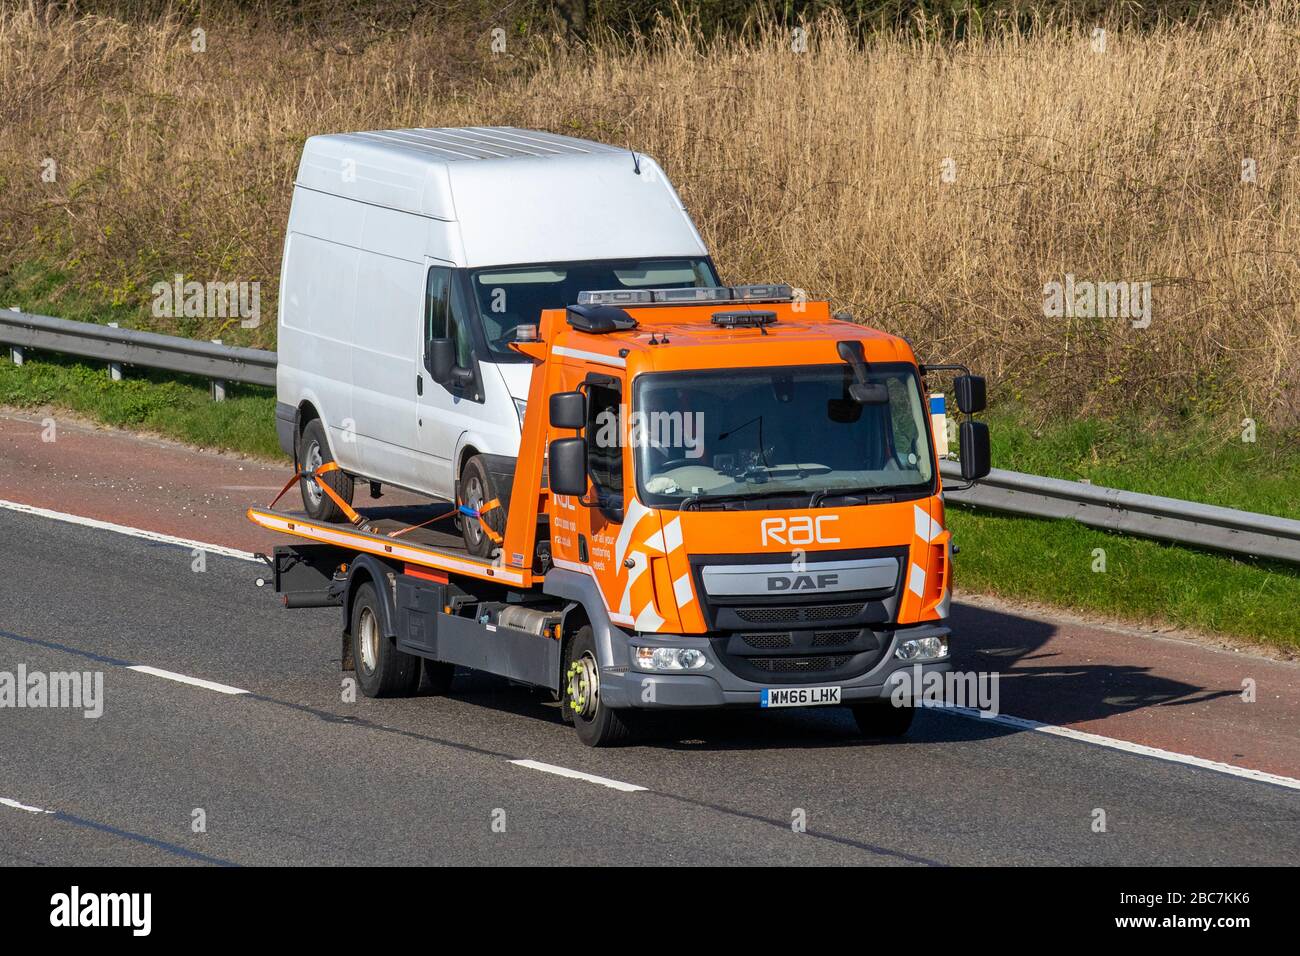 RAC 24hr Breakdown van, Classic car roadside assistance, broken down delivery trucks, haulage, lorry, transportation, truck, DAF vehicle recovery, delivery, transport industry, freight, on the M6 at Preston, UK Stock Photo